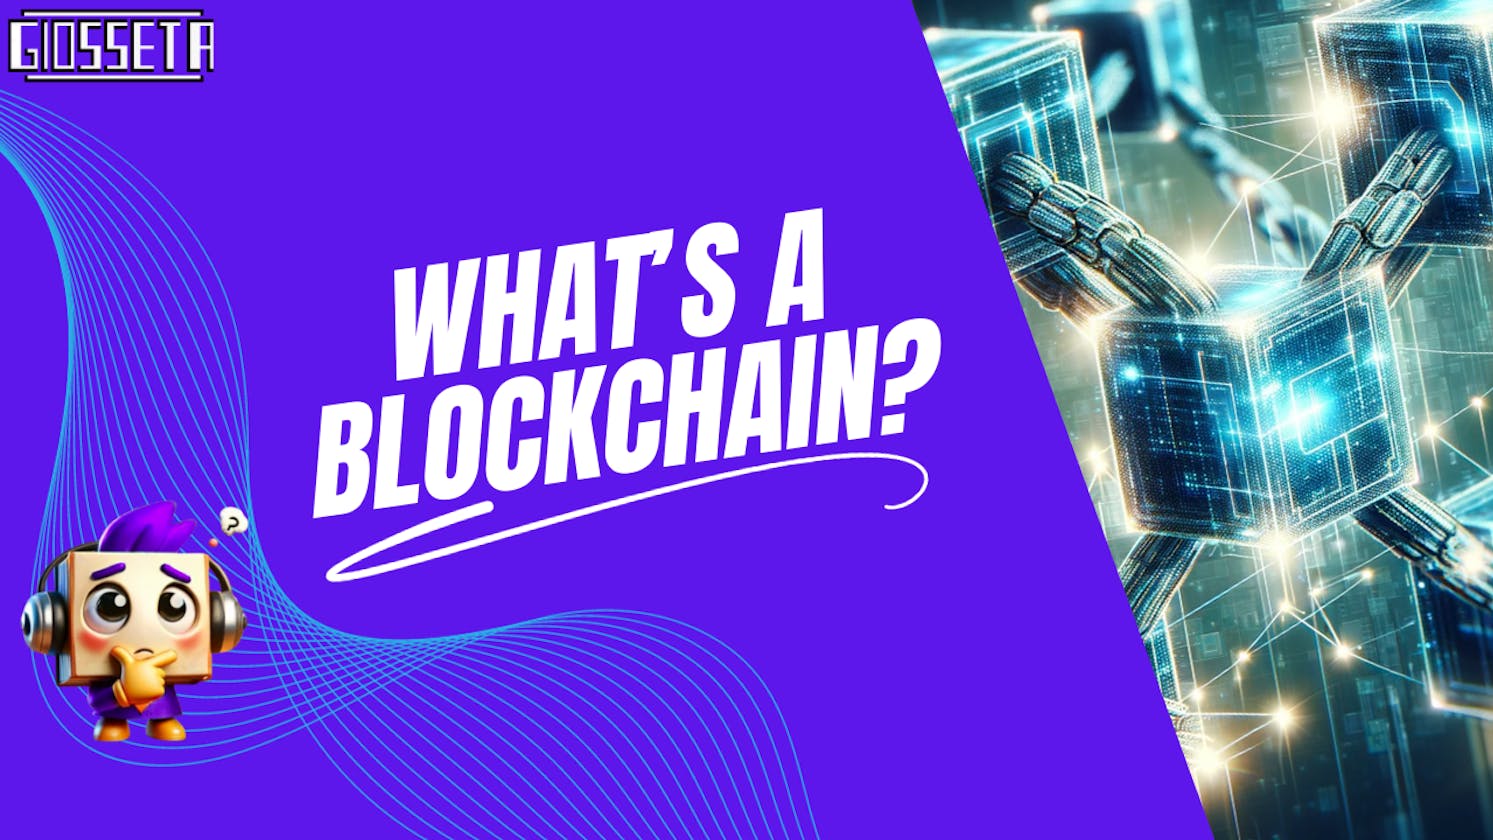 What is a Blockchain?